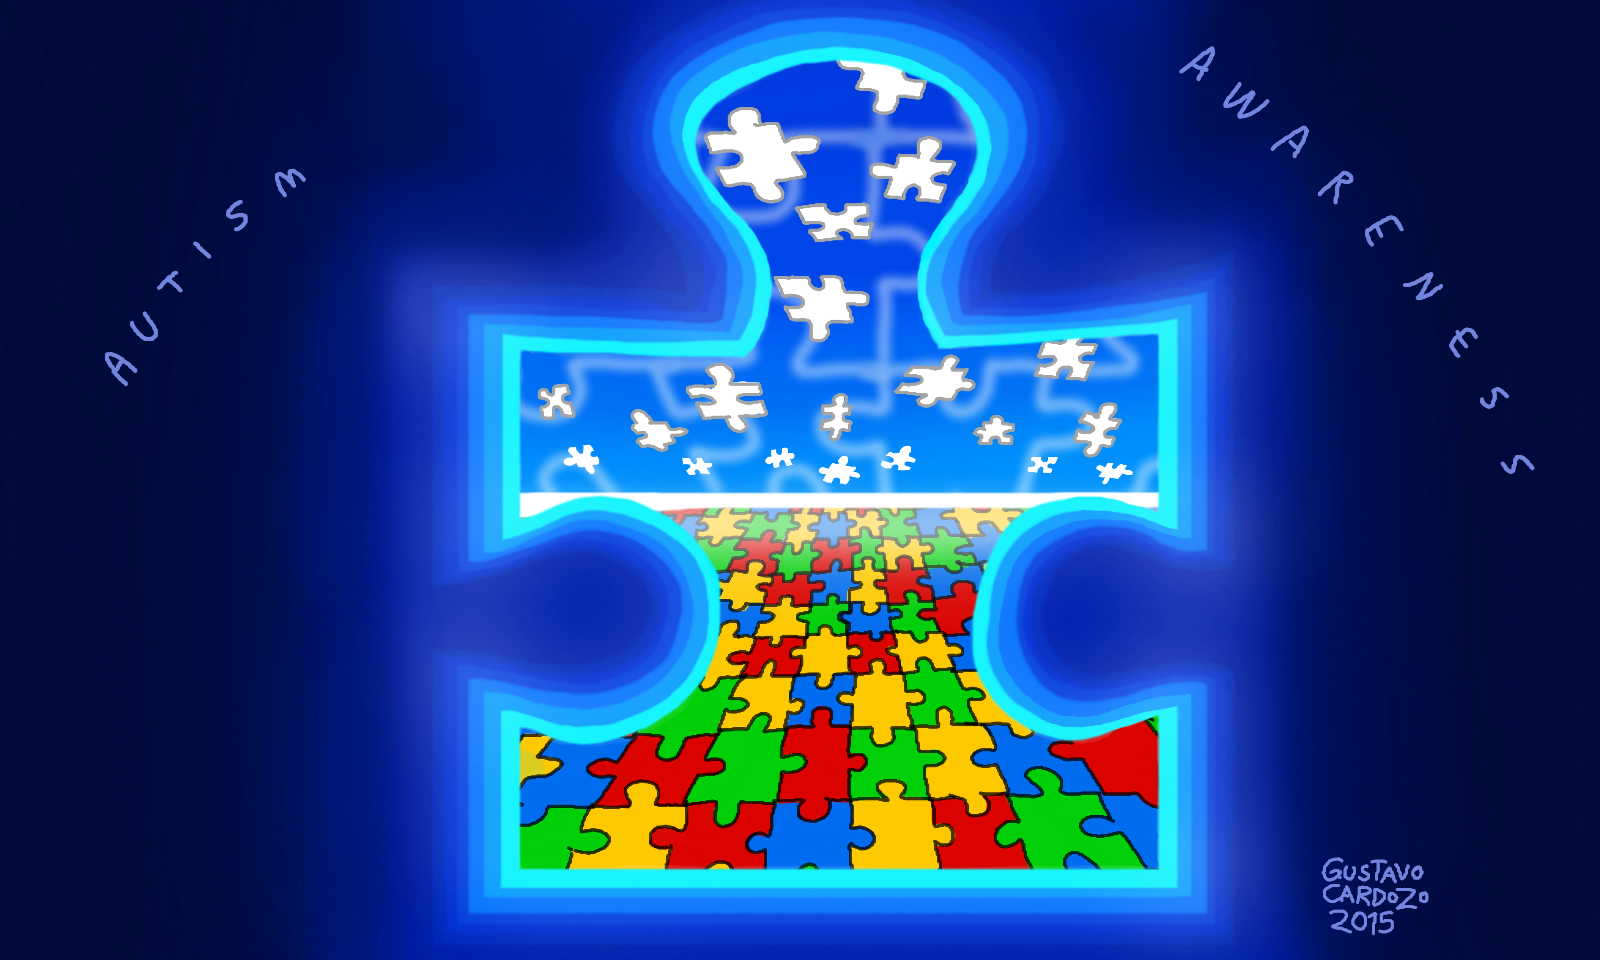 Autism  1440p Wallpaper by LunaAxis on DeviantArt